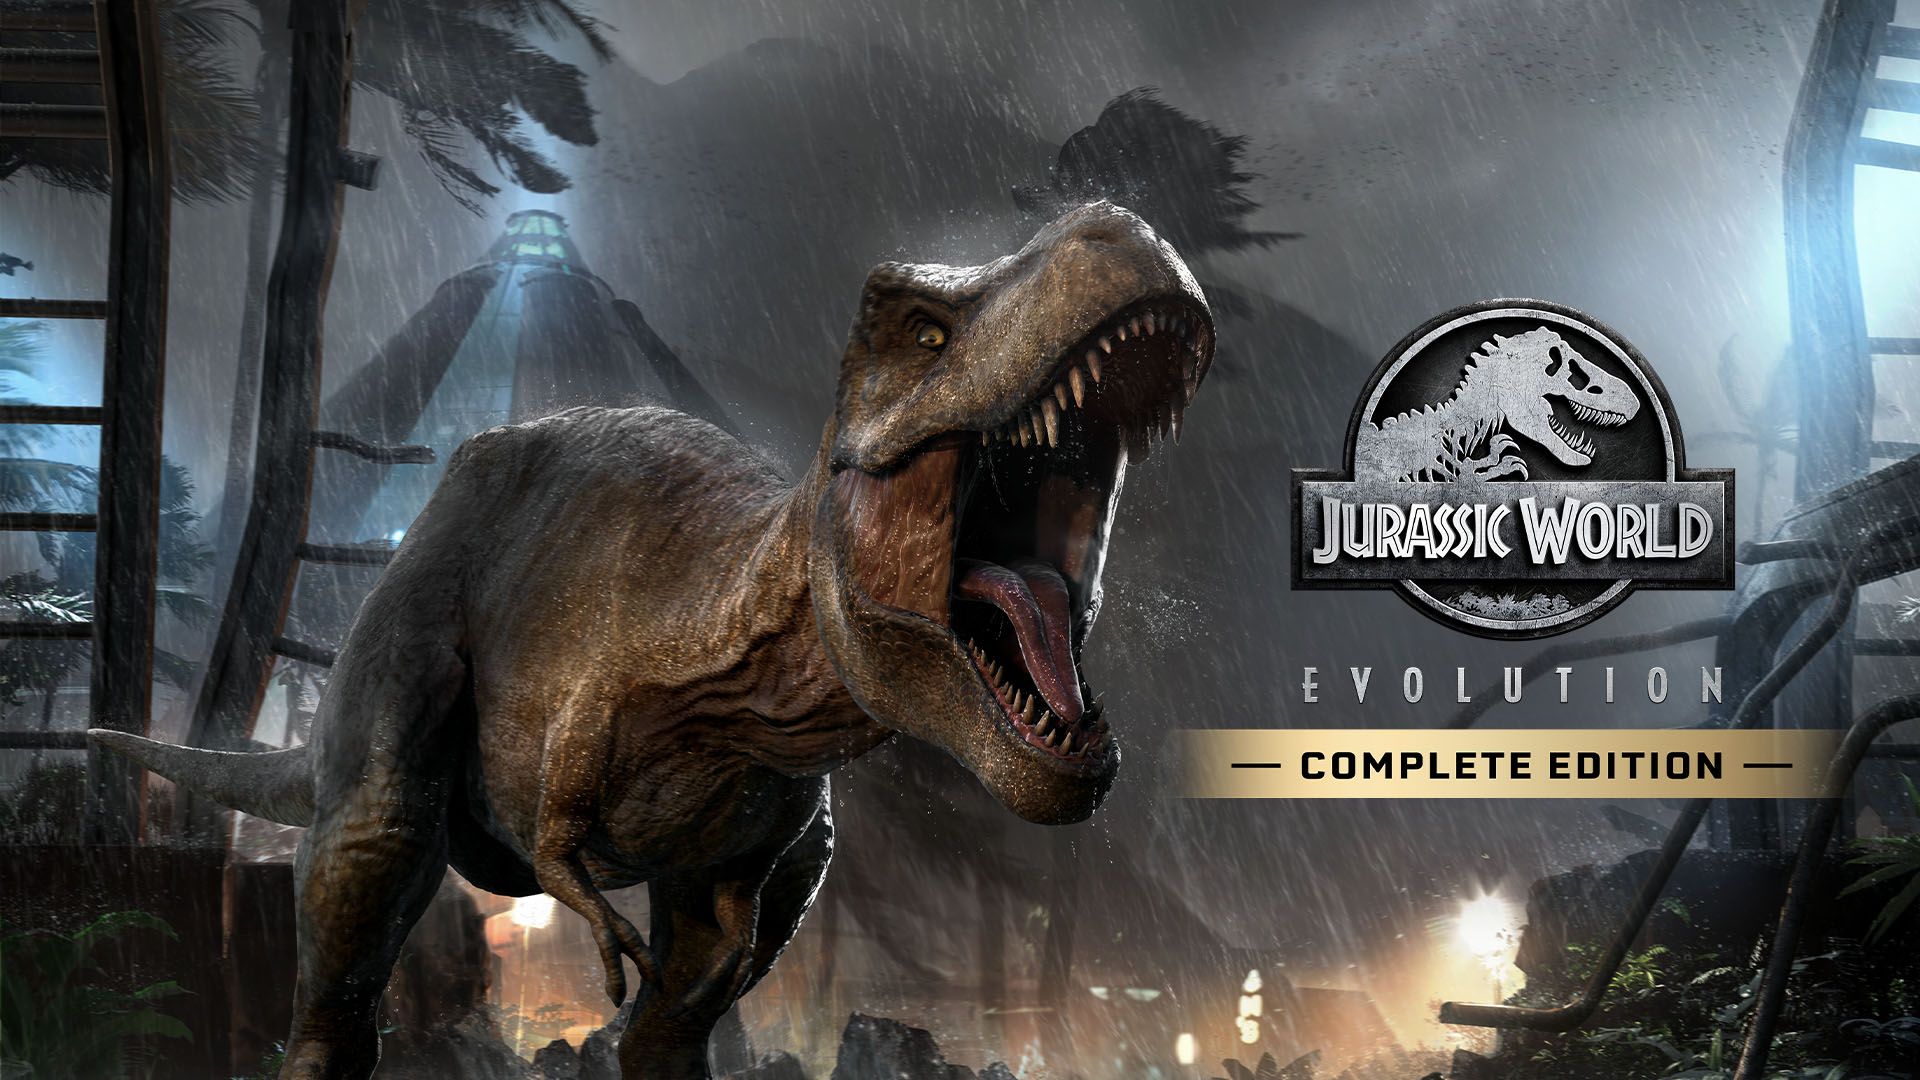 Jurassic World Evolution Announced For The Switch, But With No Touch Screen Controls